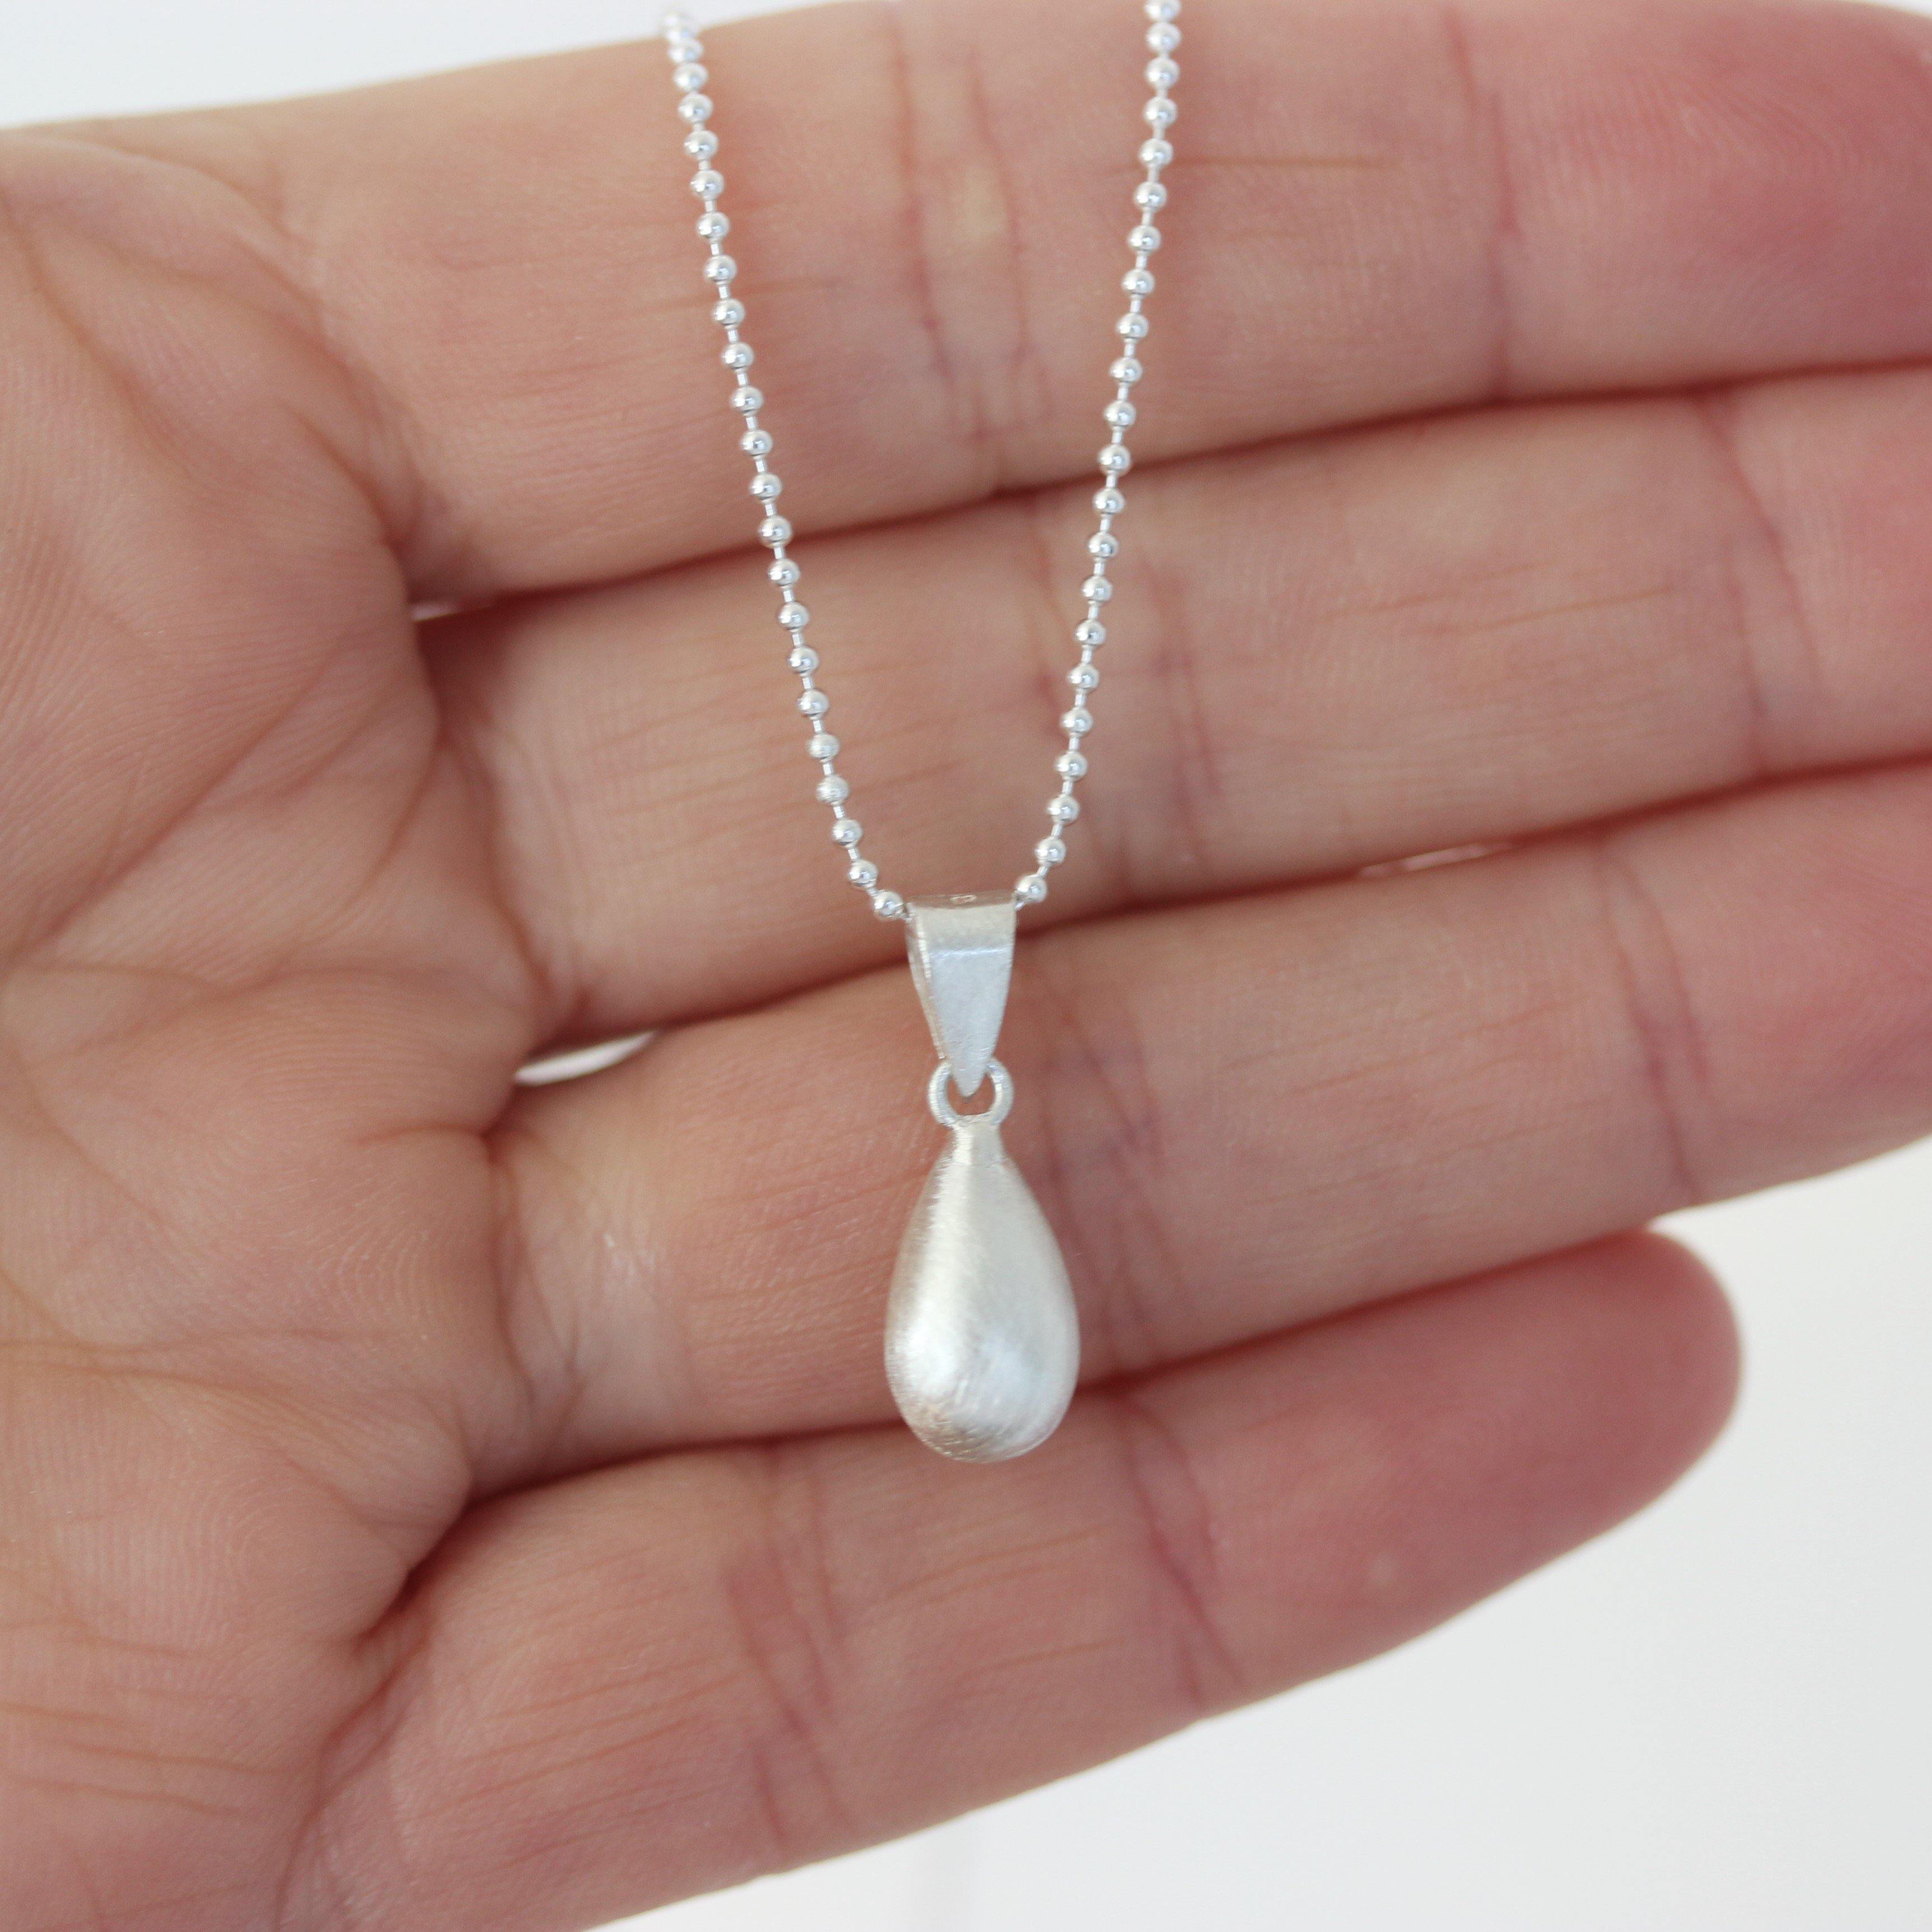 Sterling Silver Matte, Textured Teardrop Pendant & Ball Chain Necklace - STERLING SILVER DESIGNS